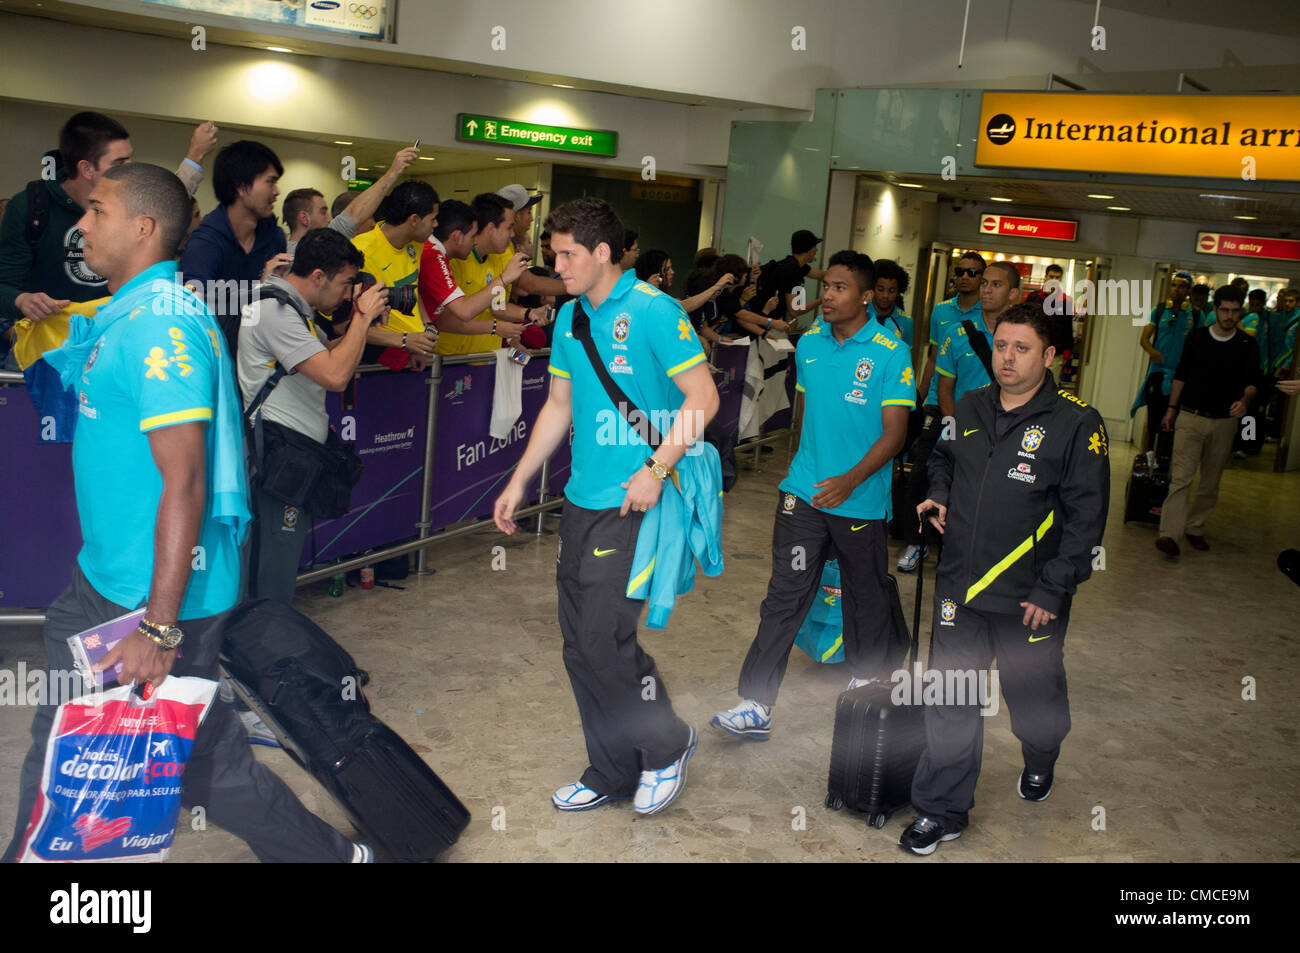 17th July 2012.  London Heathrow, UK.  Olympic Competitors and Officials arrive at Heathrow airport terminals. The Brazil Olympic Football team emerge from the airport terminal building with Police security . Stock Photo